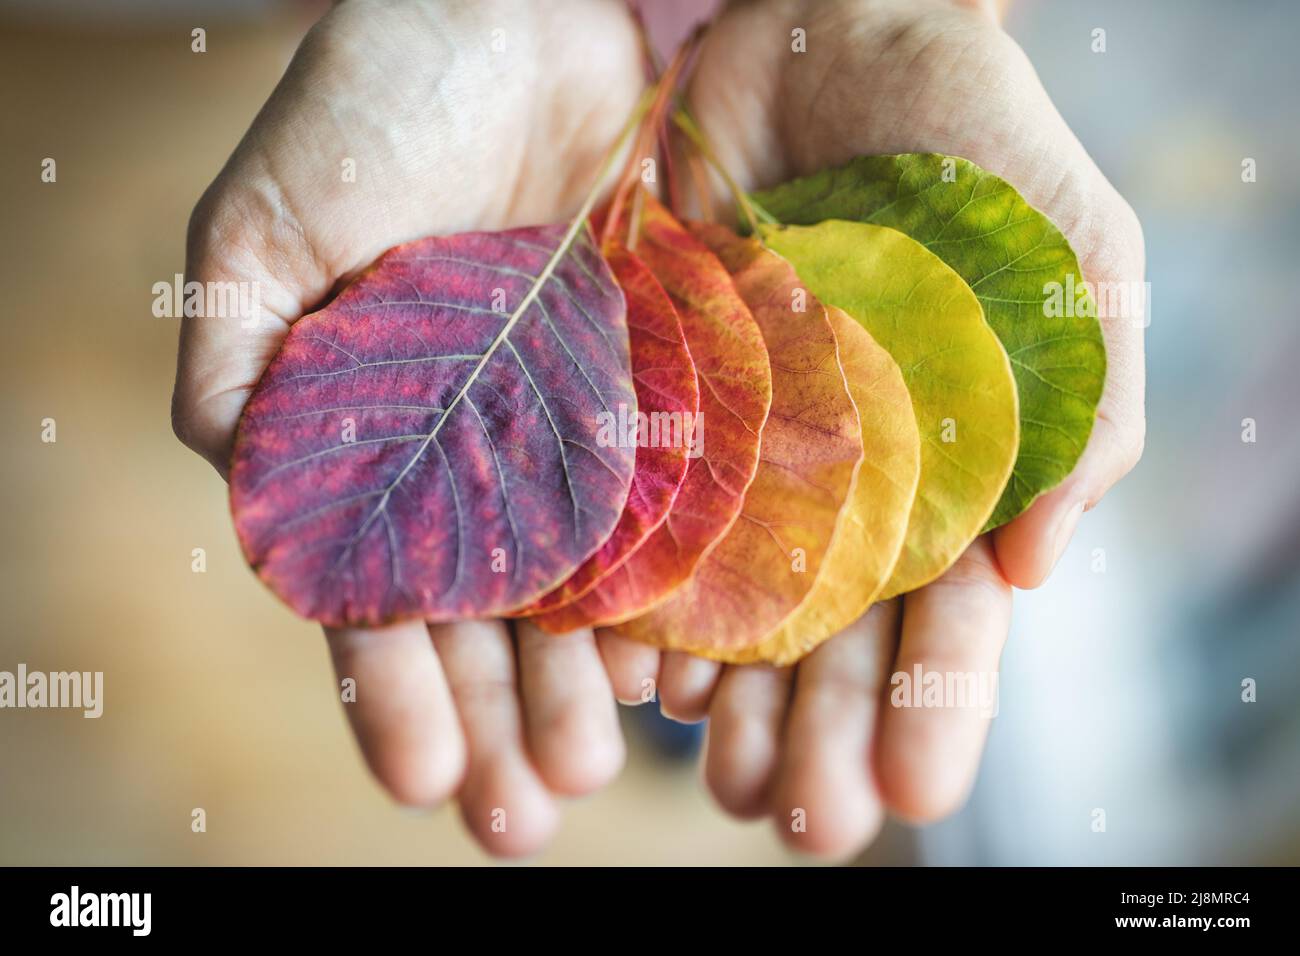 Holding a variety of colorful autumn leaves Stock Photo